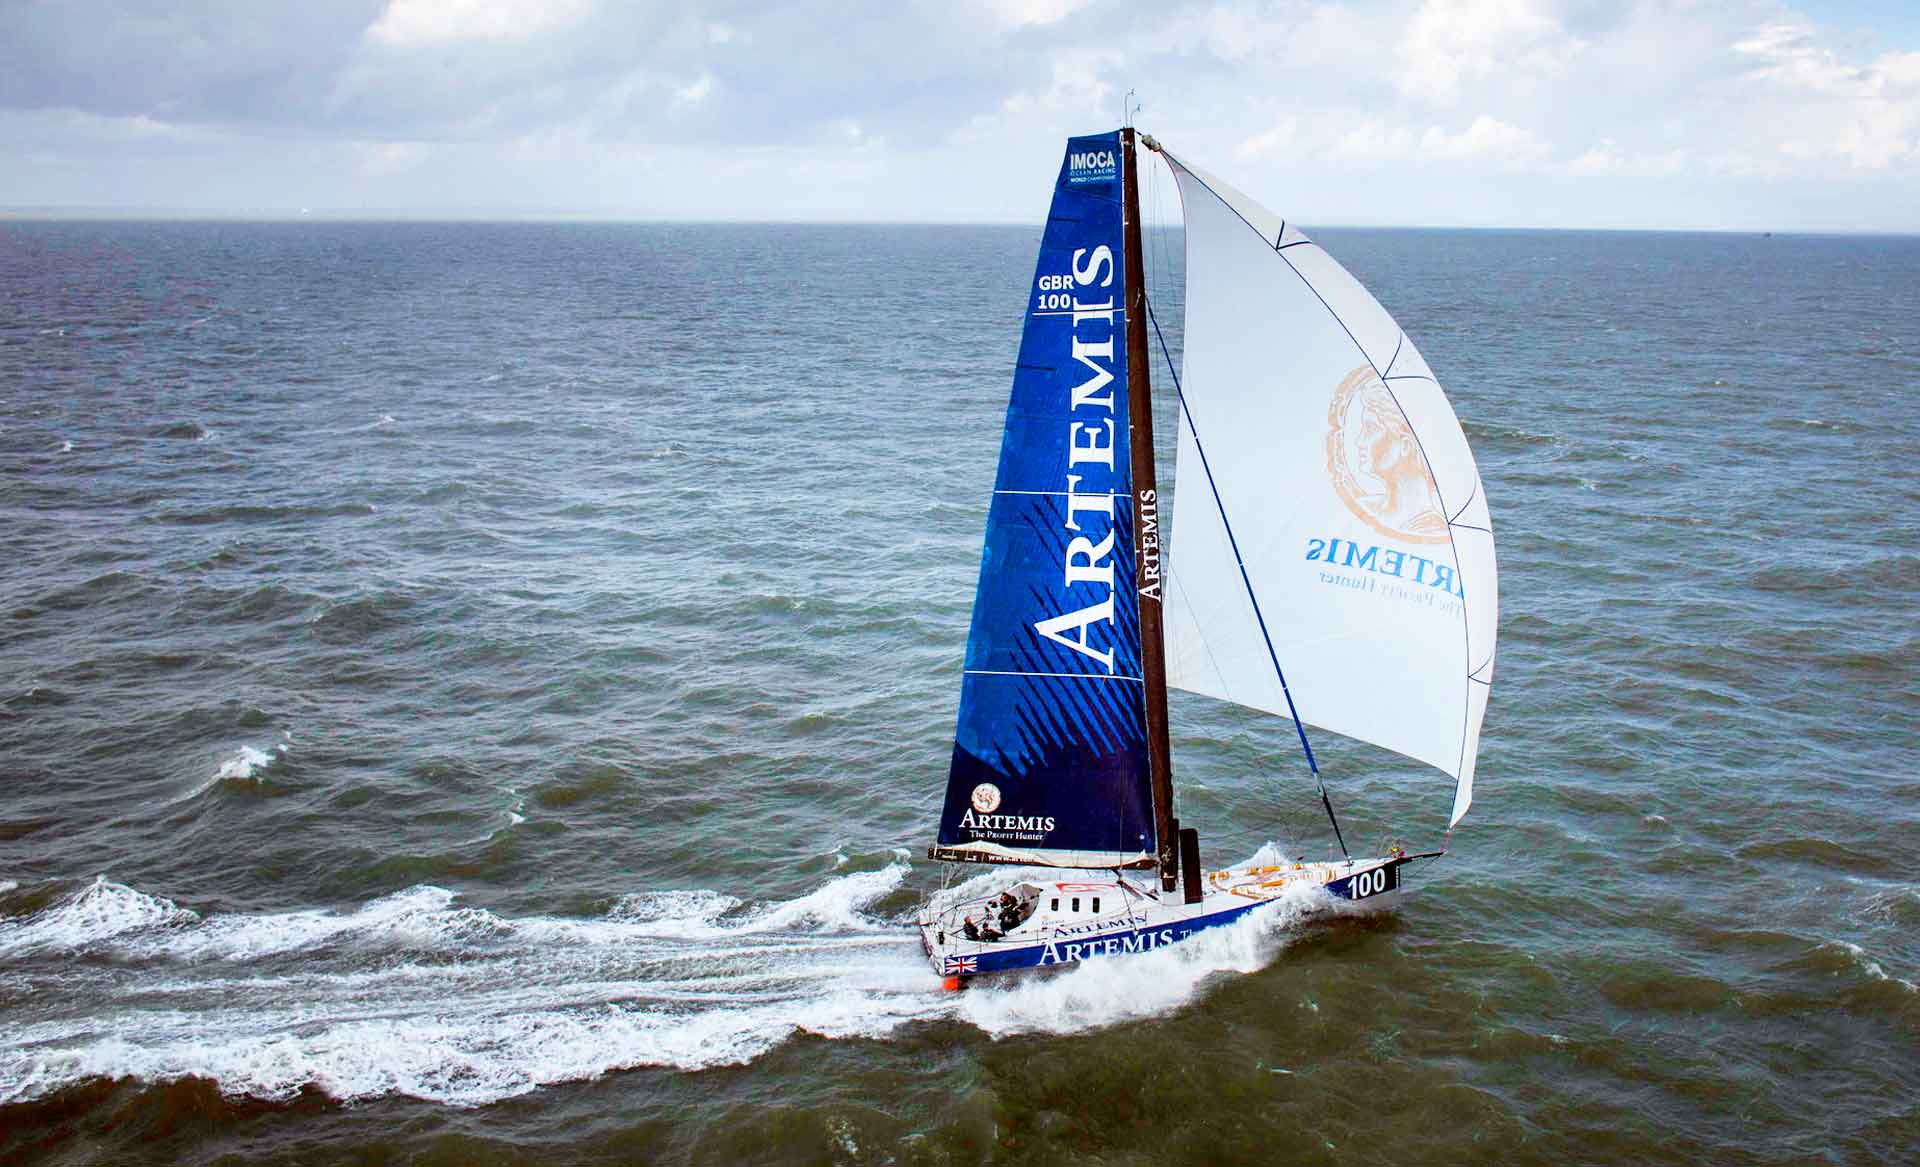 Fast. Simply fast: The Imoca 60